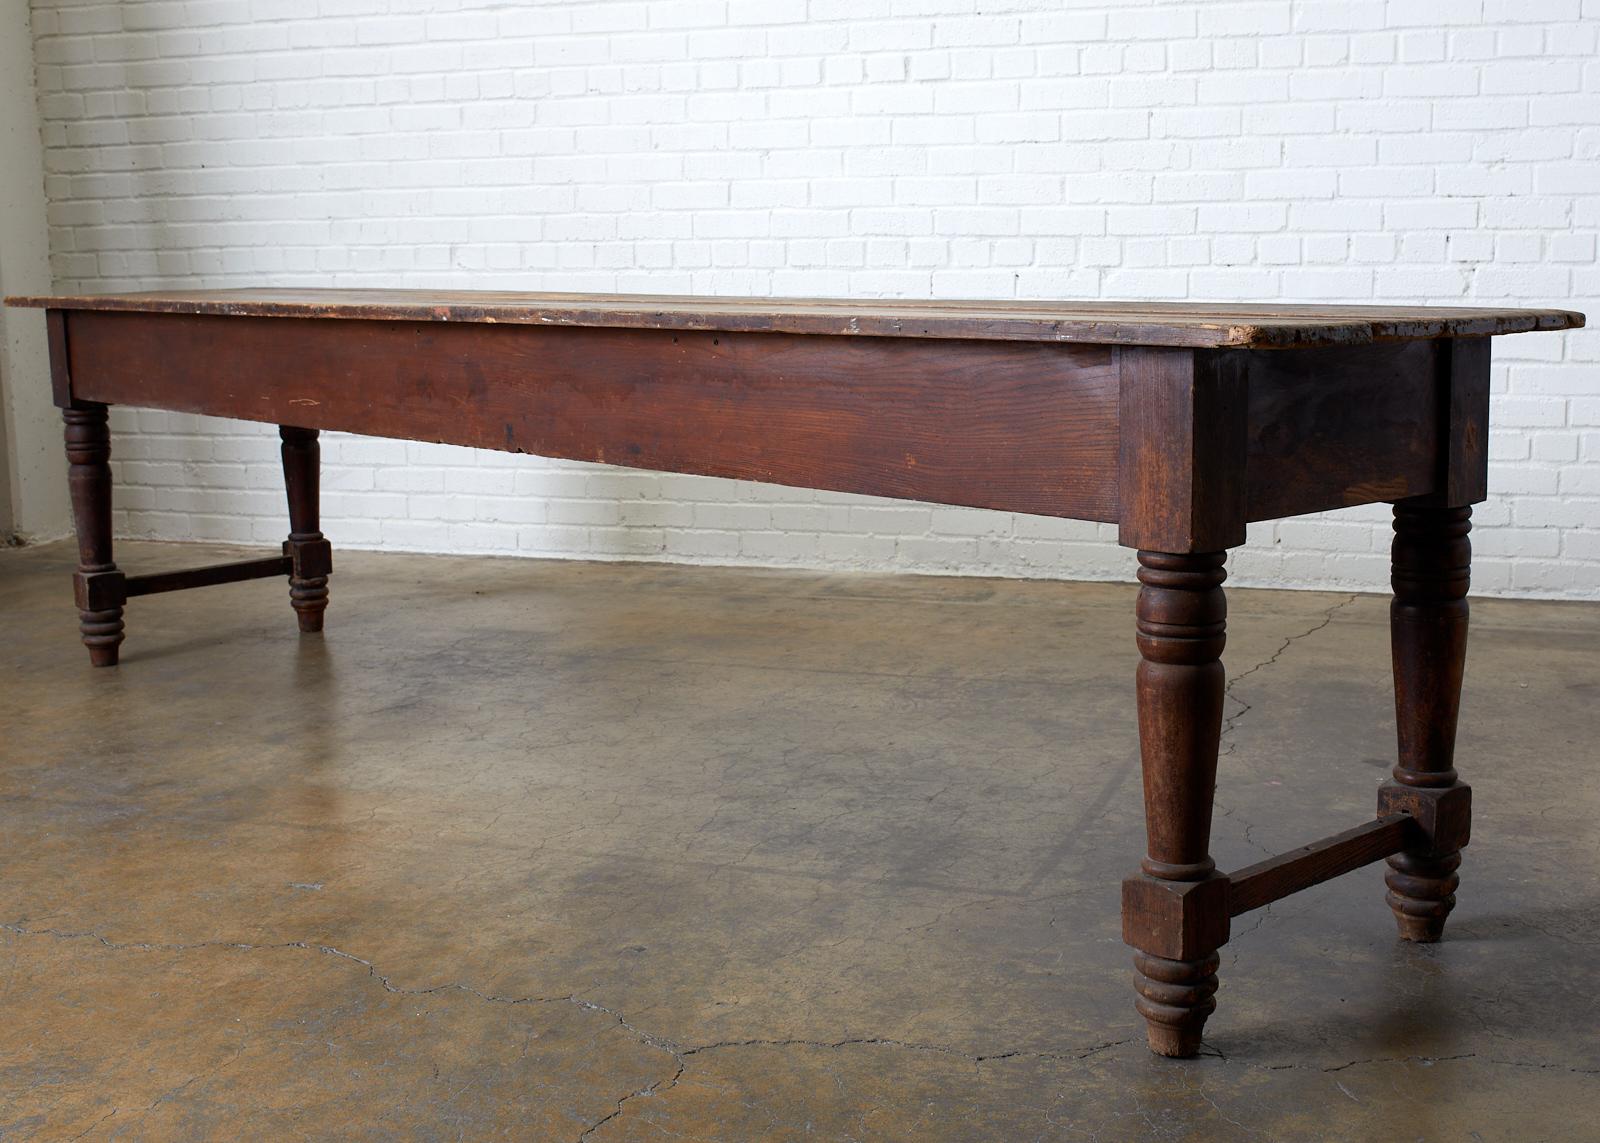 Large 19th century American farmhouse table, work table, or harvest table. Featuring a rustic plank top 10 feet long. Supported by thick turned legs conjoined with a stretcher. Makes a wonderful display table or console table. Very heavy and solid